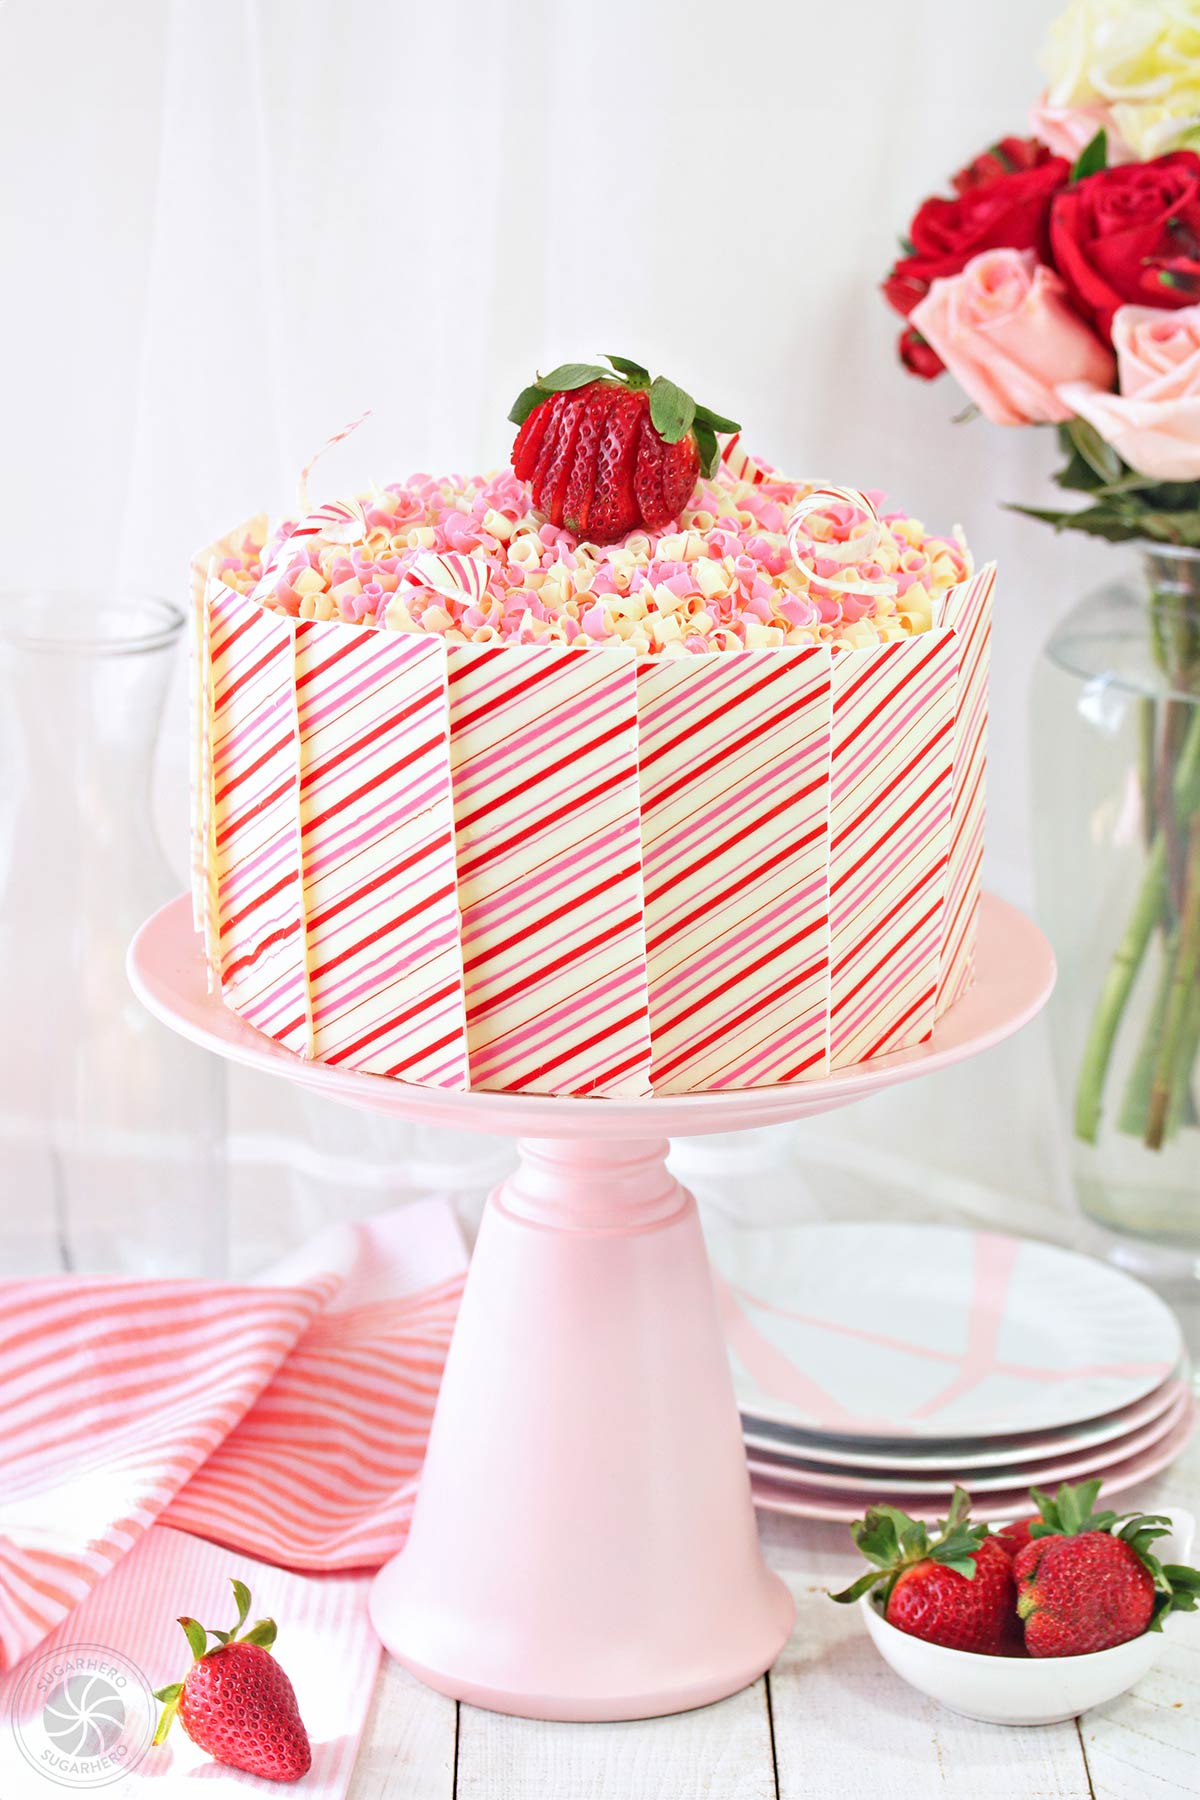 Strawberries and Cream Layer Cake - cake covered in pink and white striped chocolate panels, on a pink cake stand | From SugarHero.com